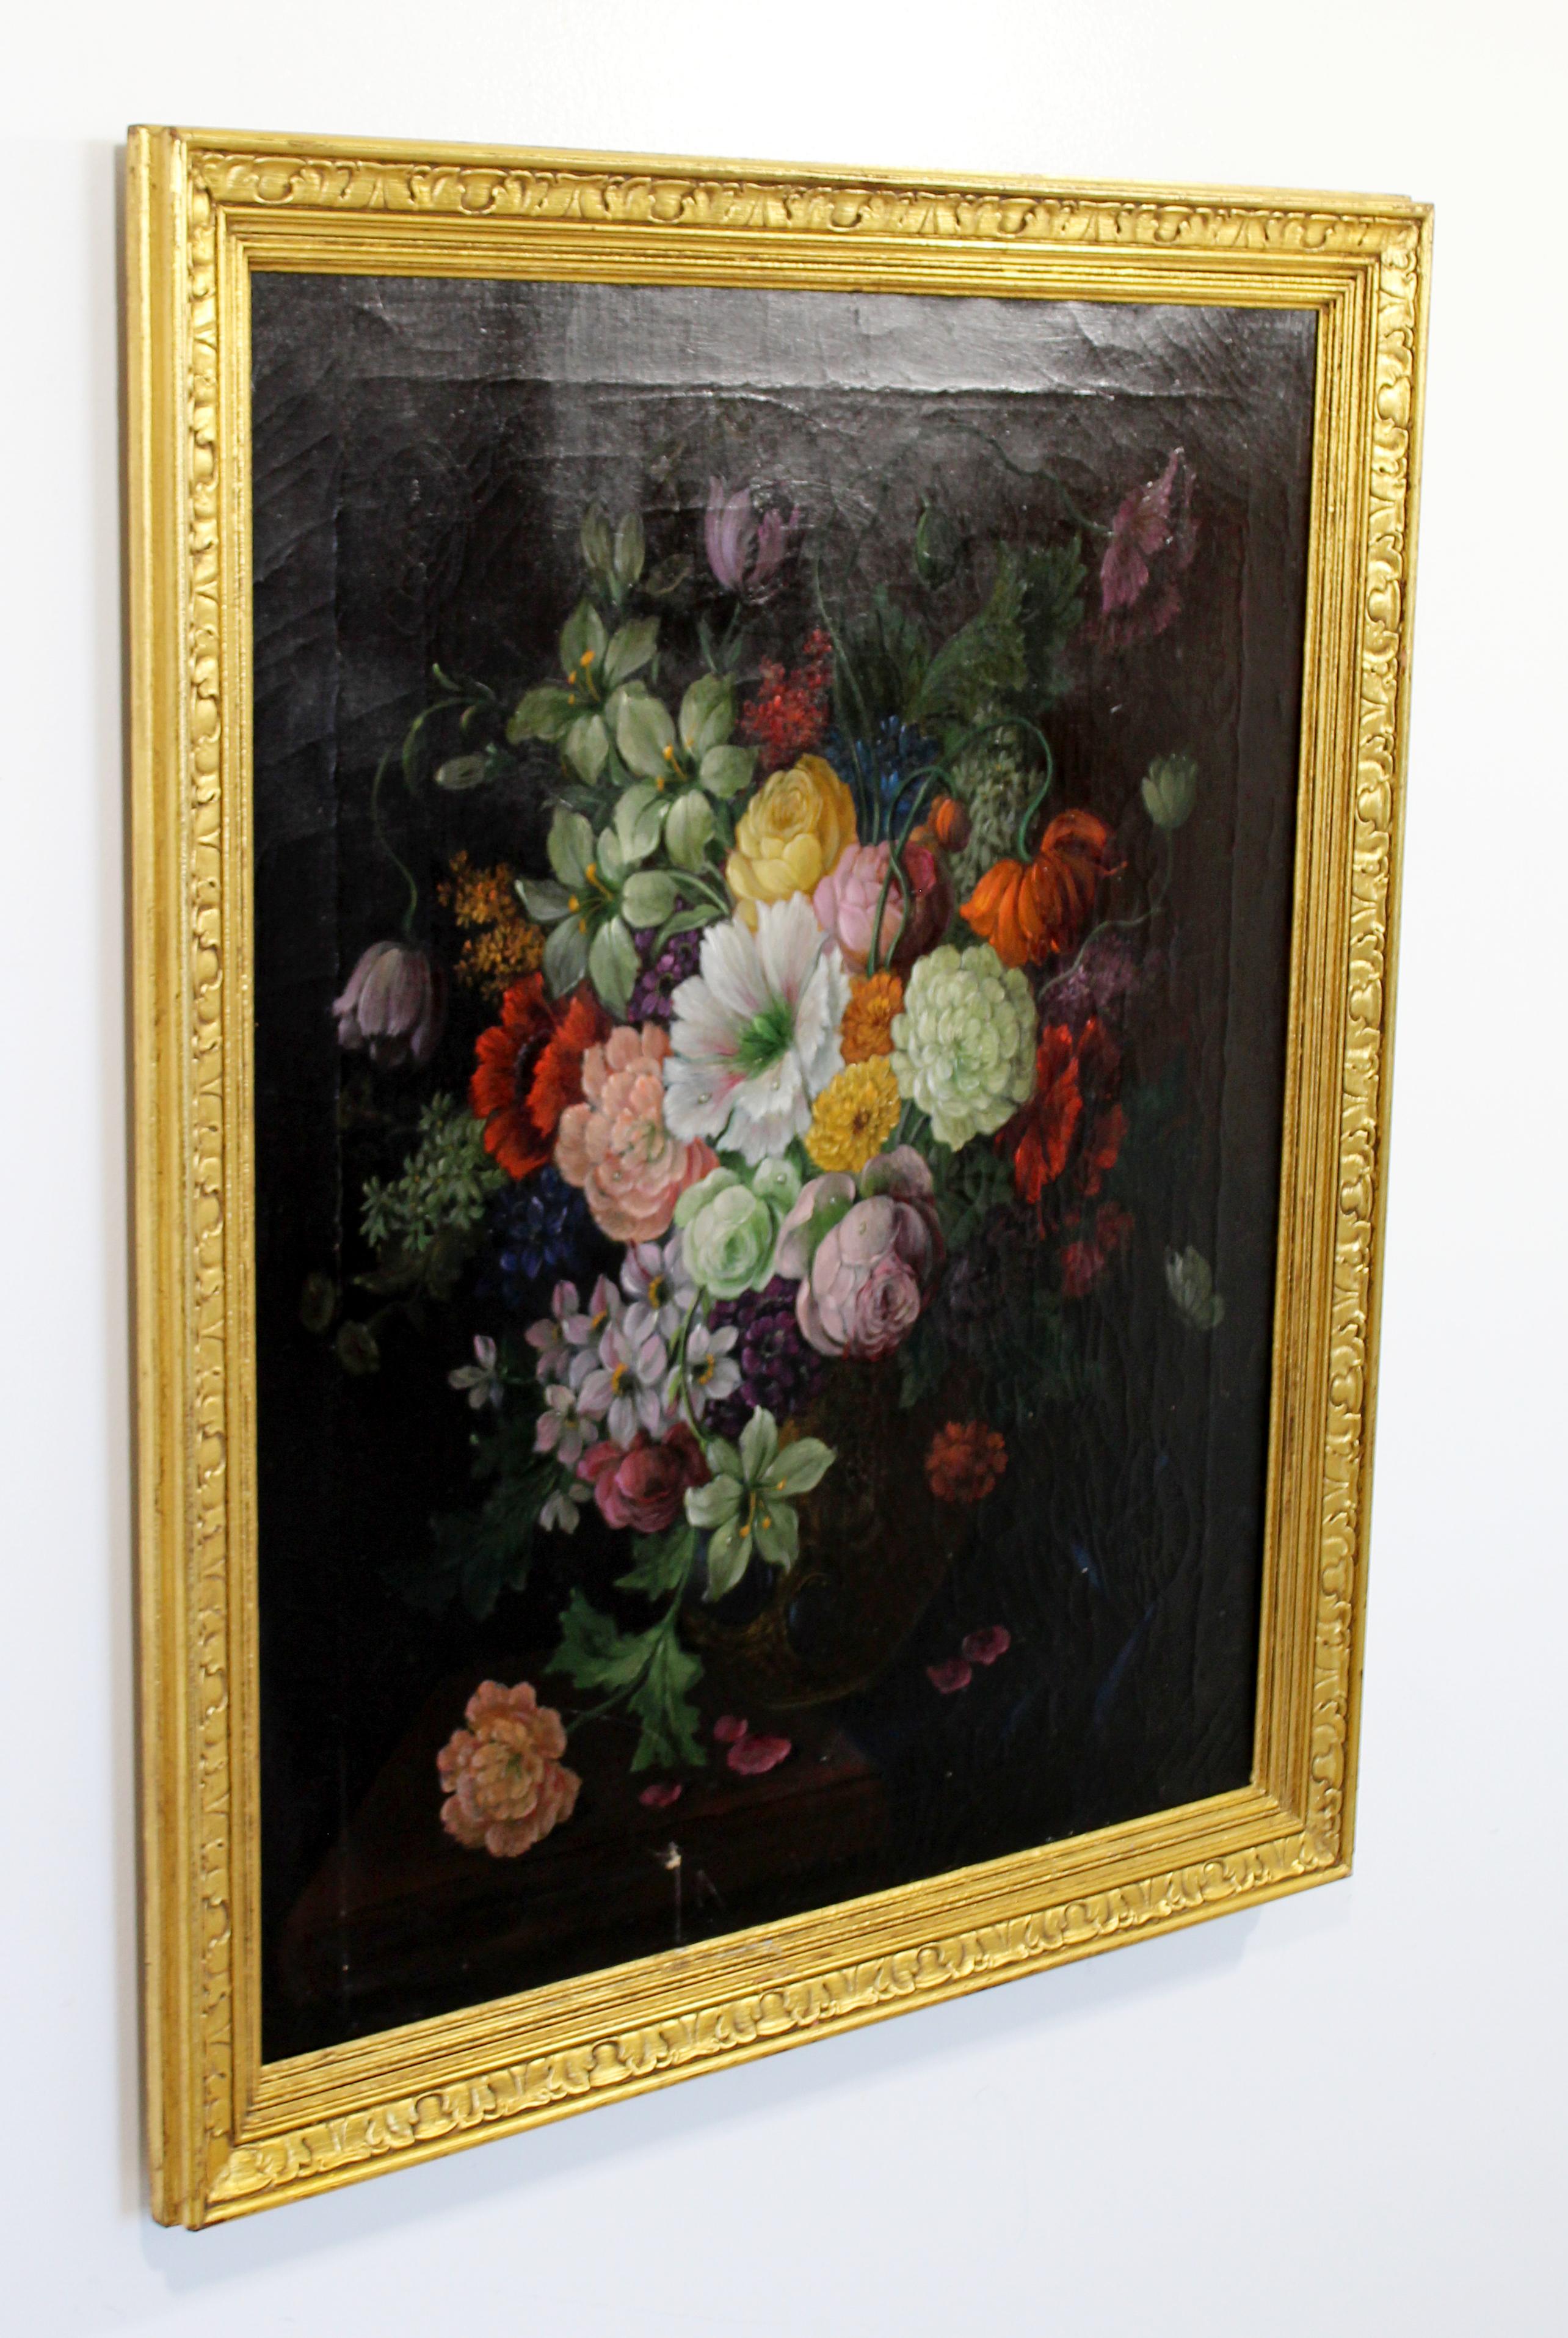 For your consideration is a stunning, gold giltwood framed, oil on canvas painting, circa the late 19th century. In excellent antique condition. The dimensions are 27